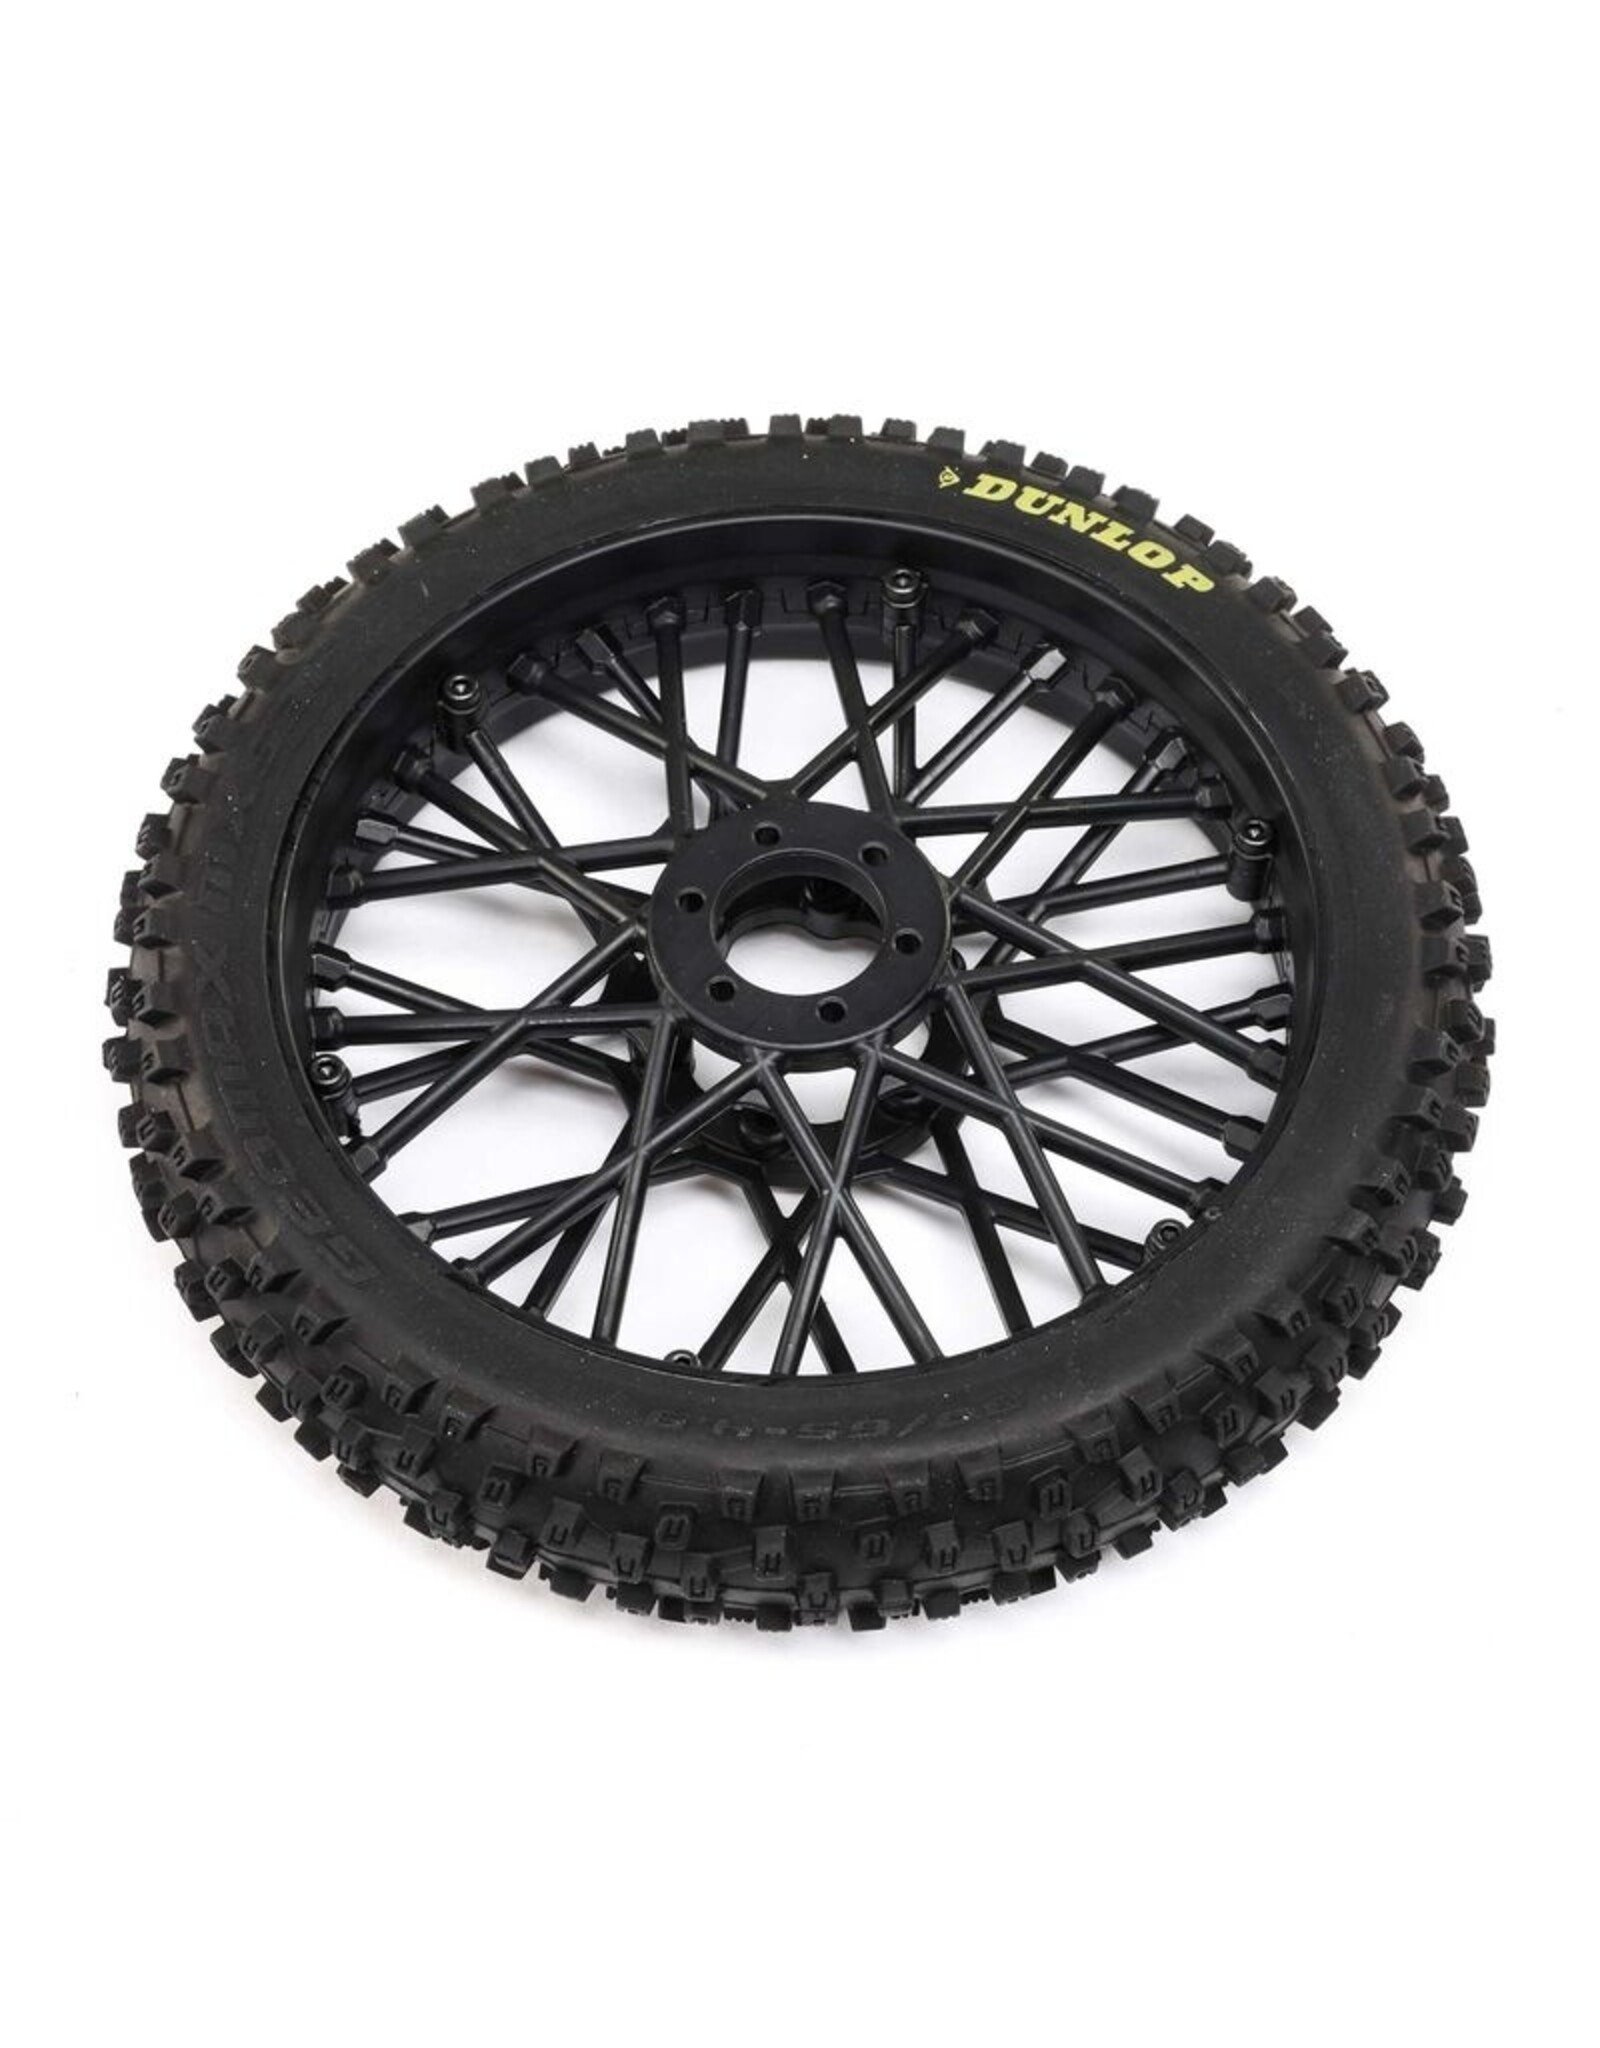 Losi LOS46004 Dunlop MX53 Front Tire Mounted, Black: PM-MX